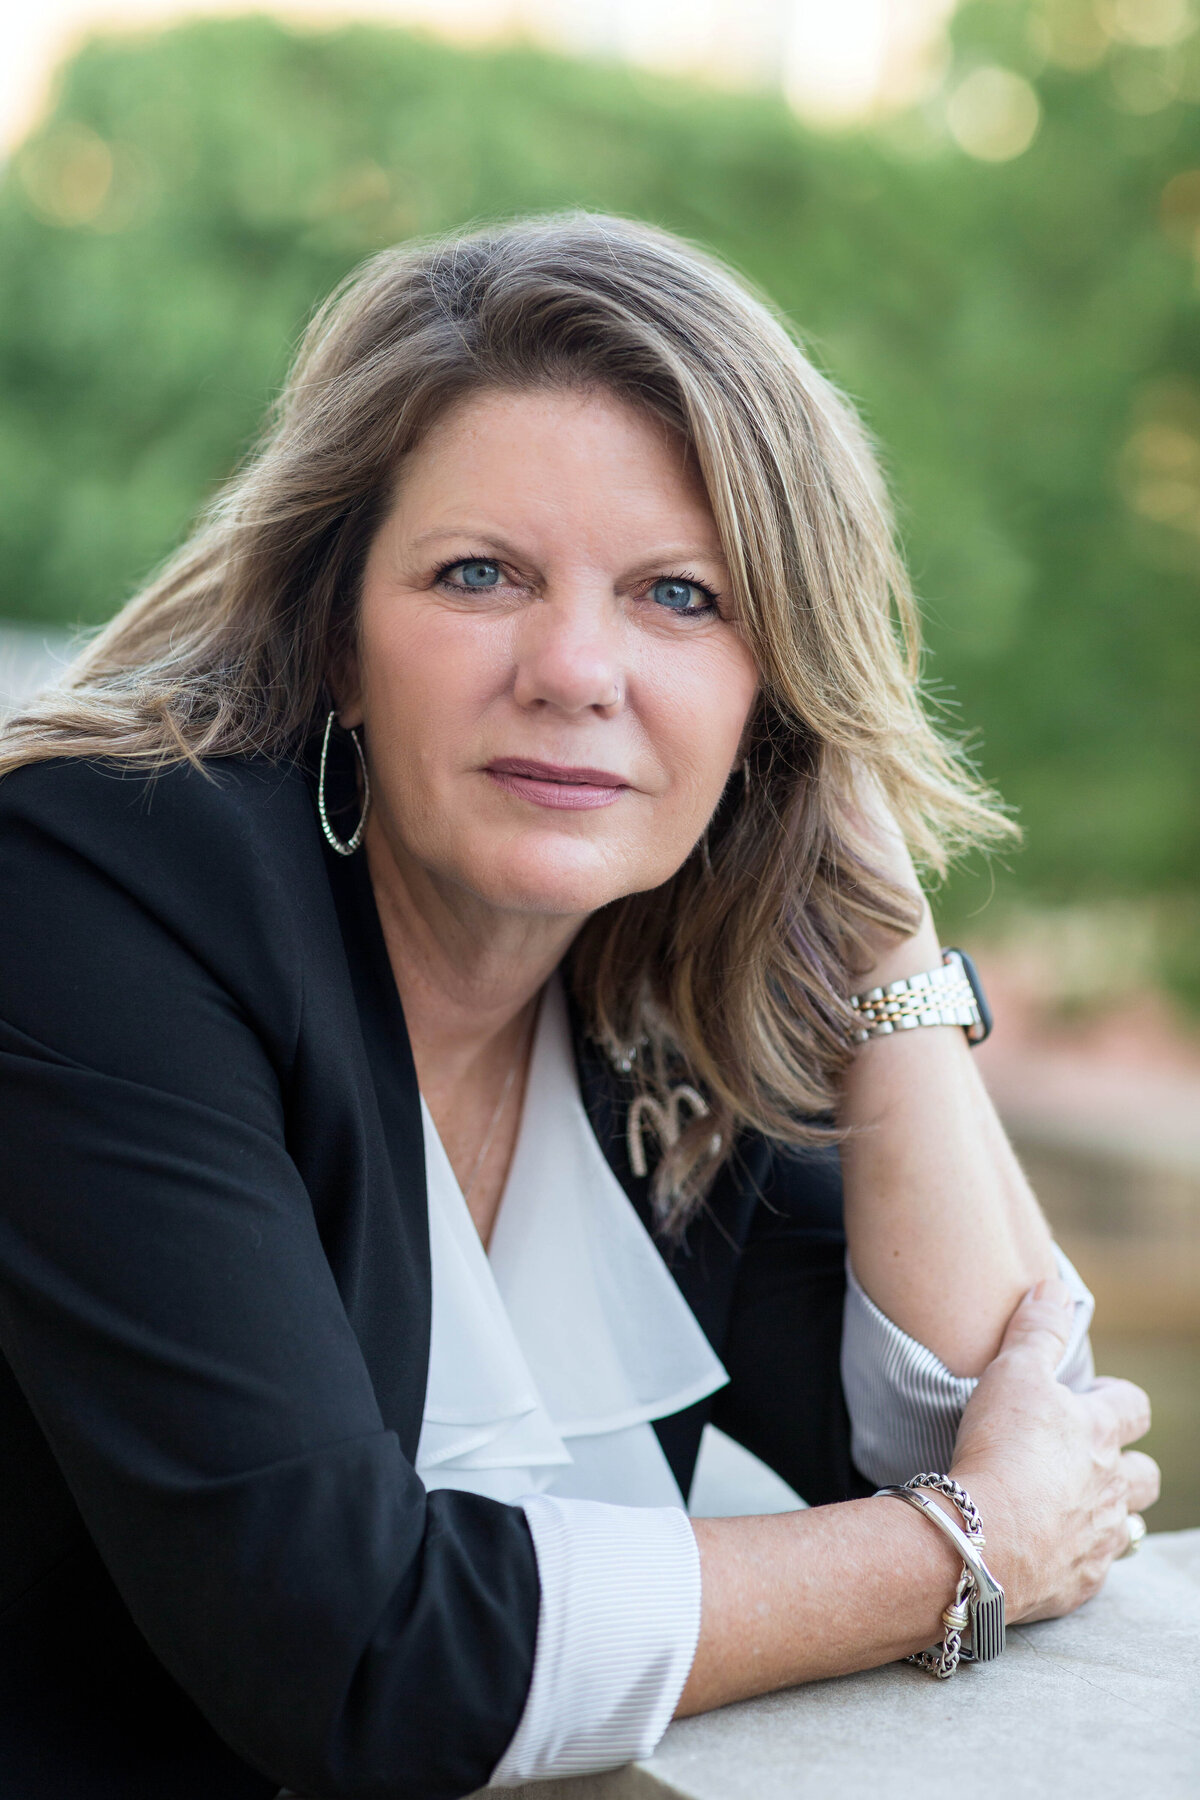 Woman is looking at the camera during an outdoor headshot photo session and is wearing a black suit jacket with white ruffled blouse and sliver hoop earrings